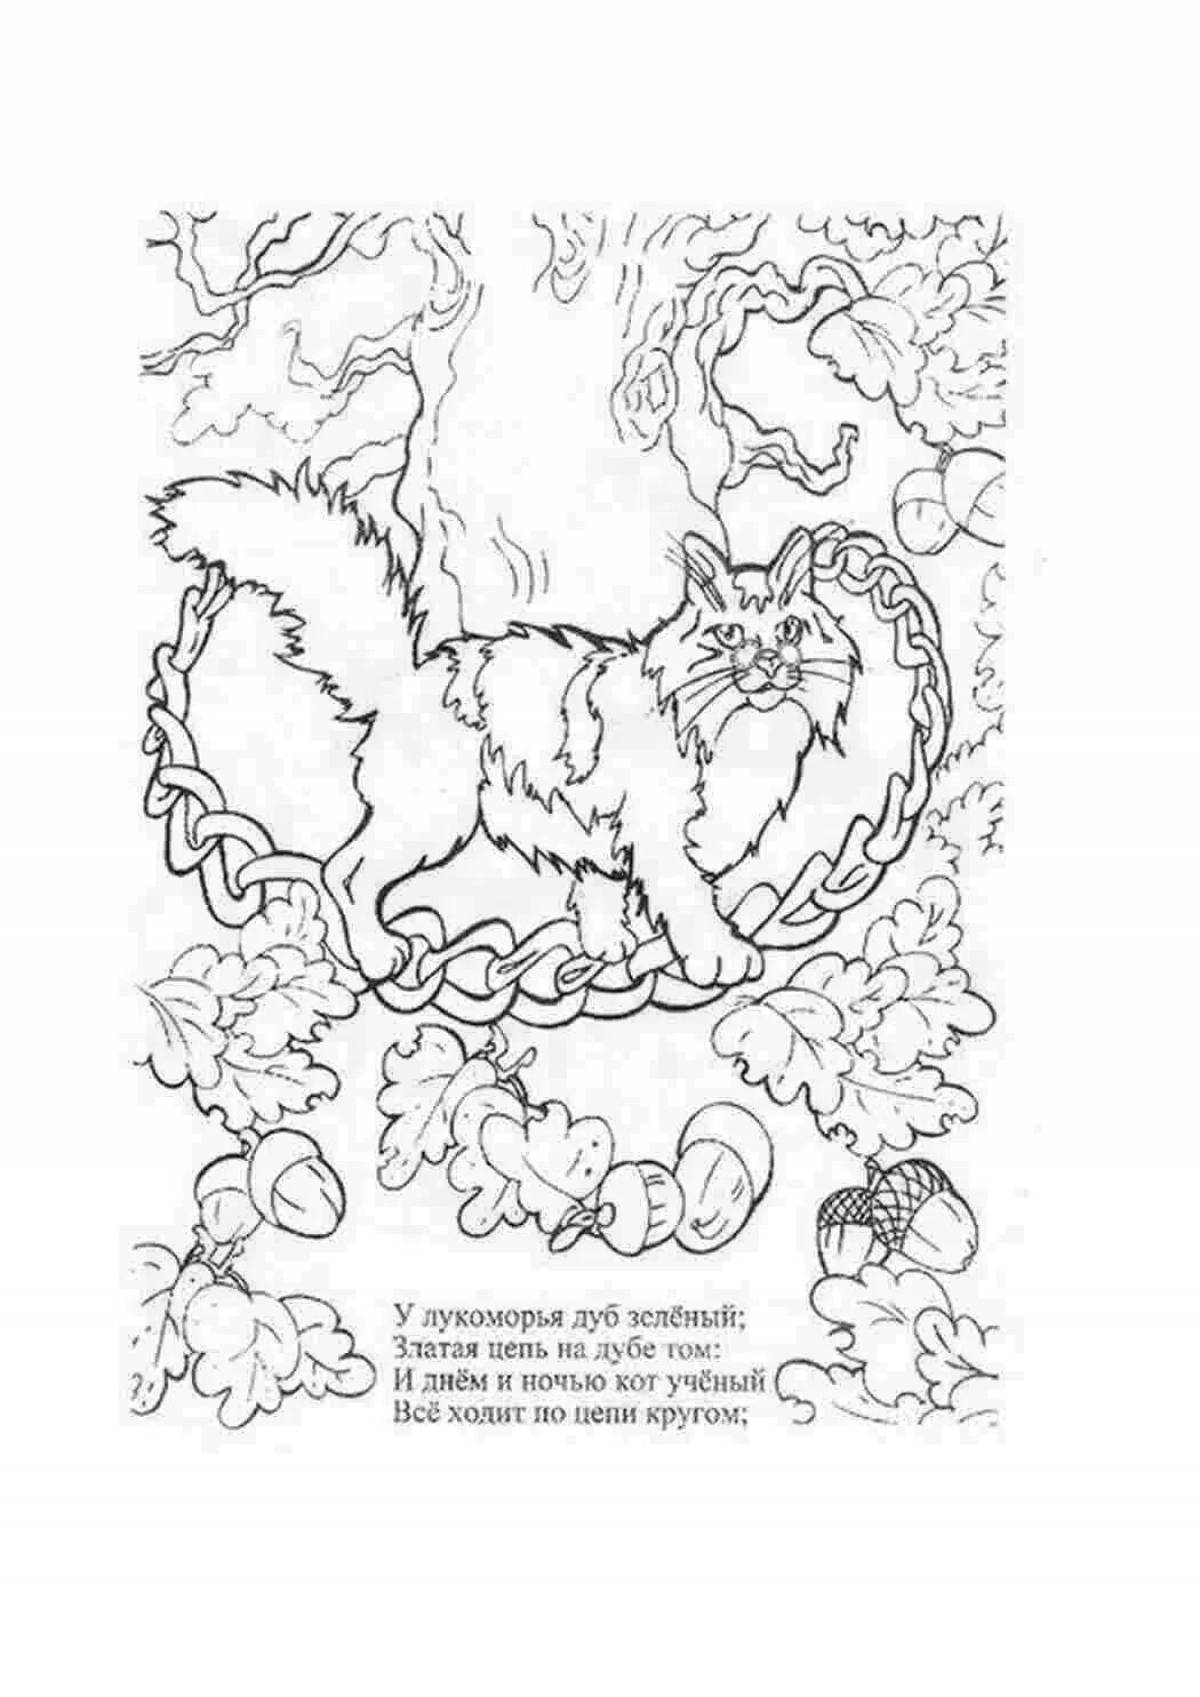 Amazing coloring book based on Pushkin's fairy tales